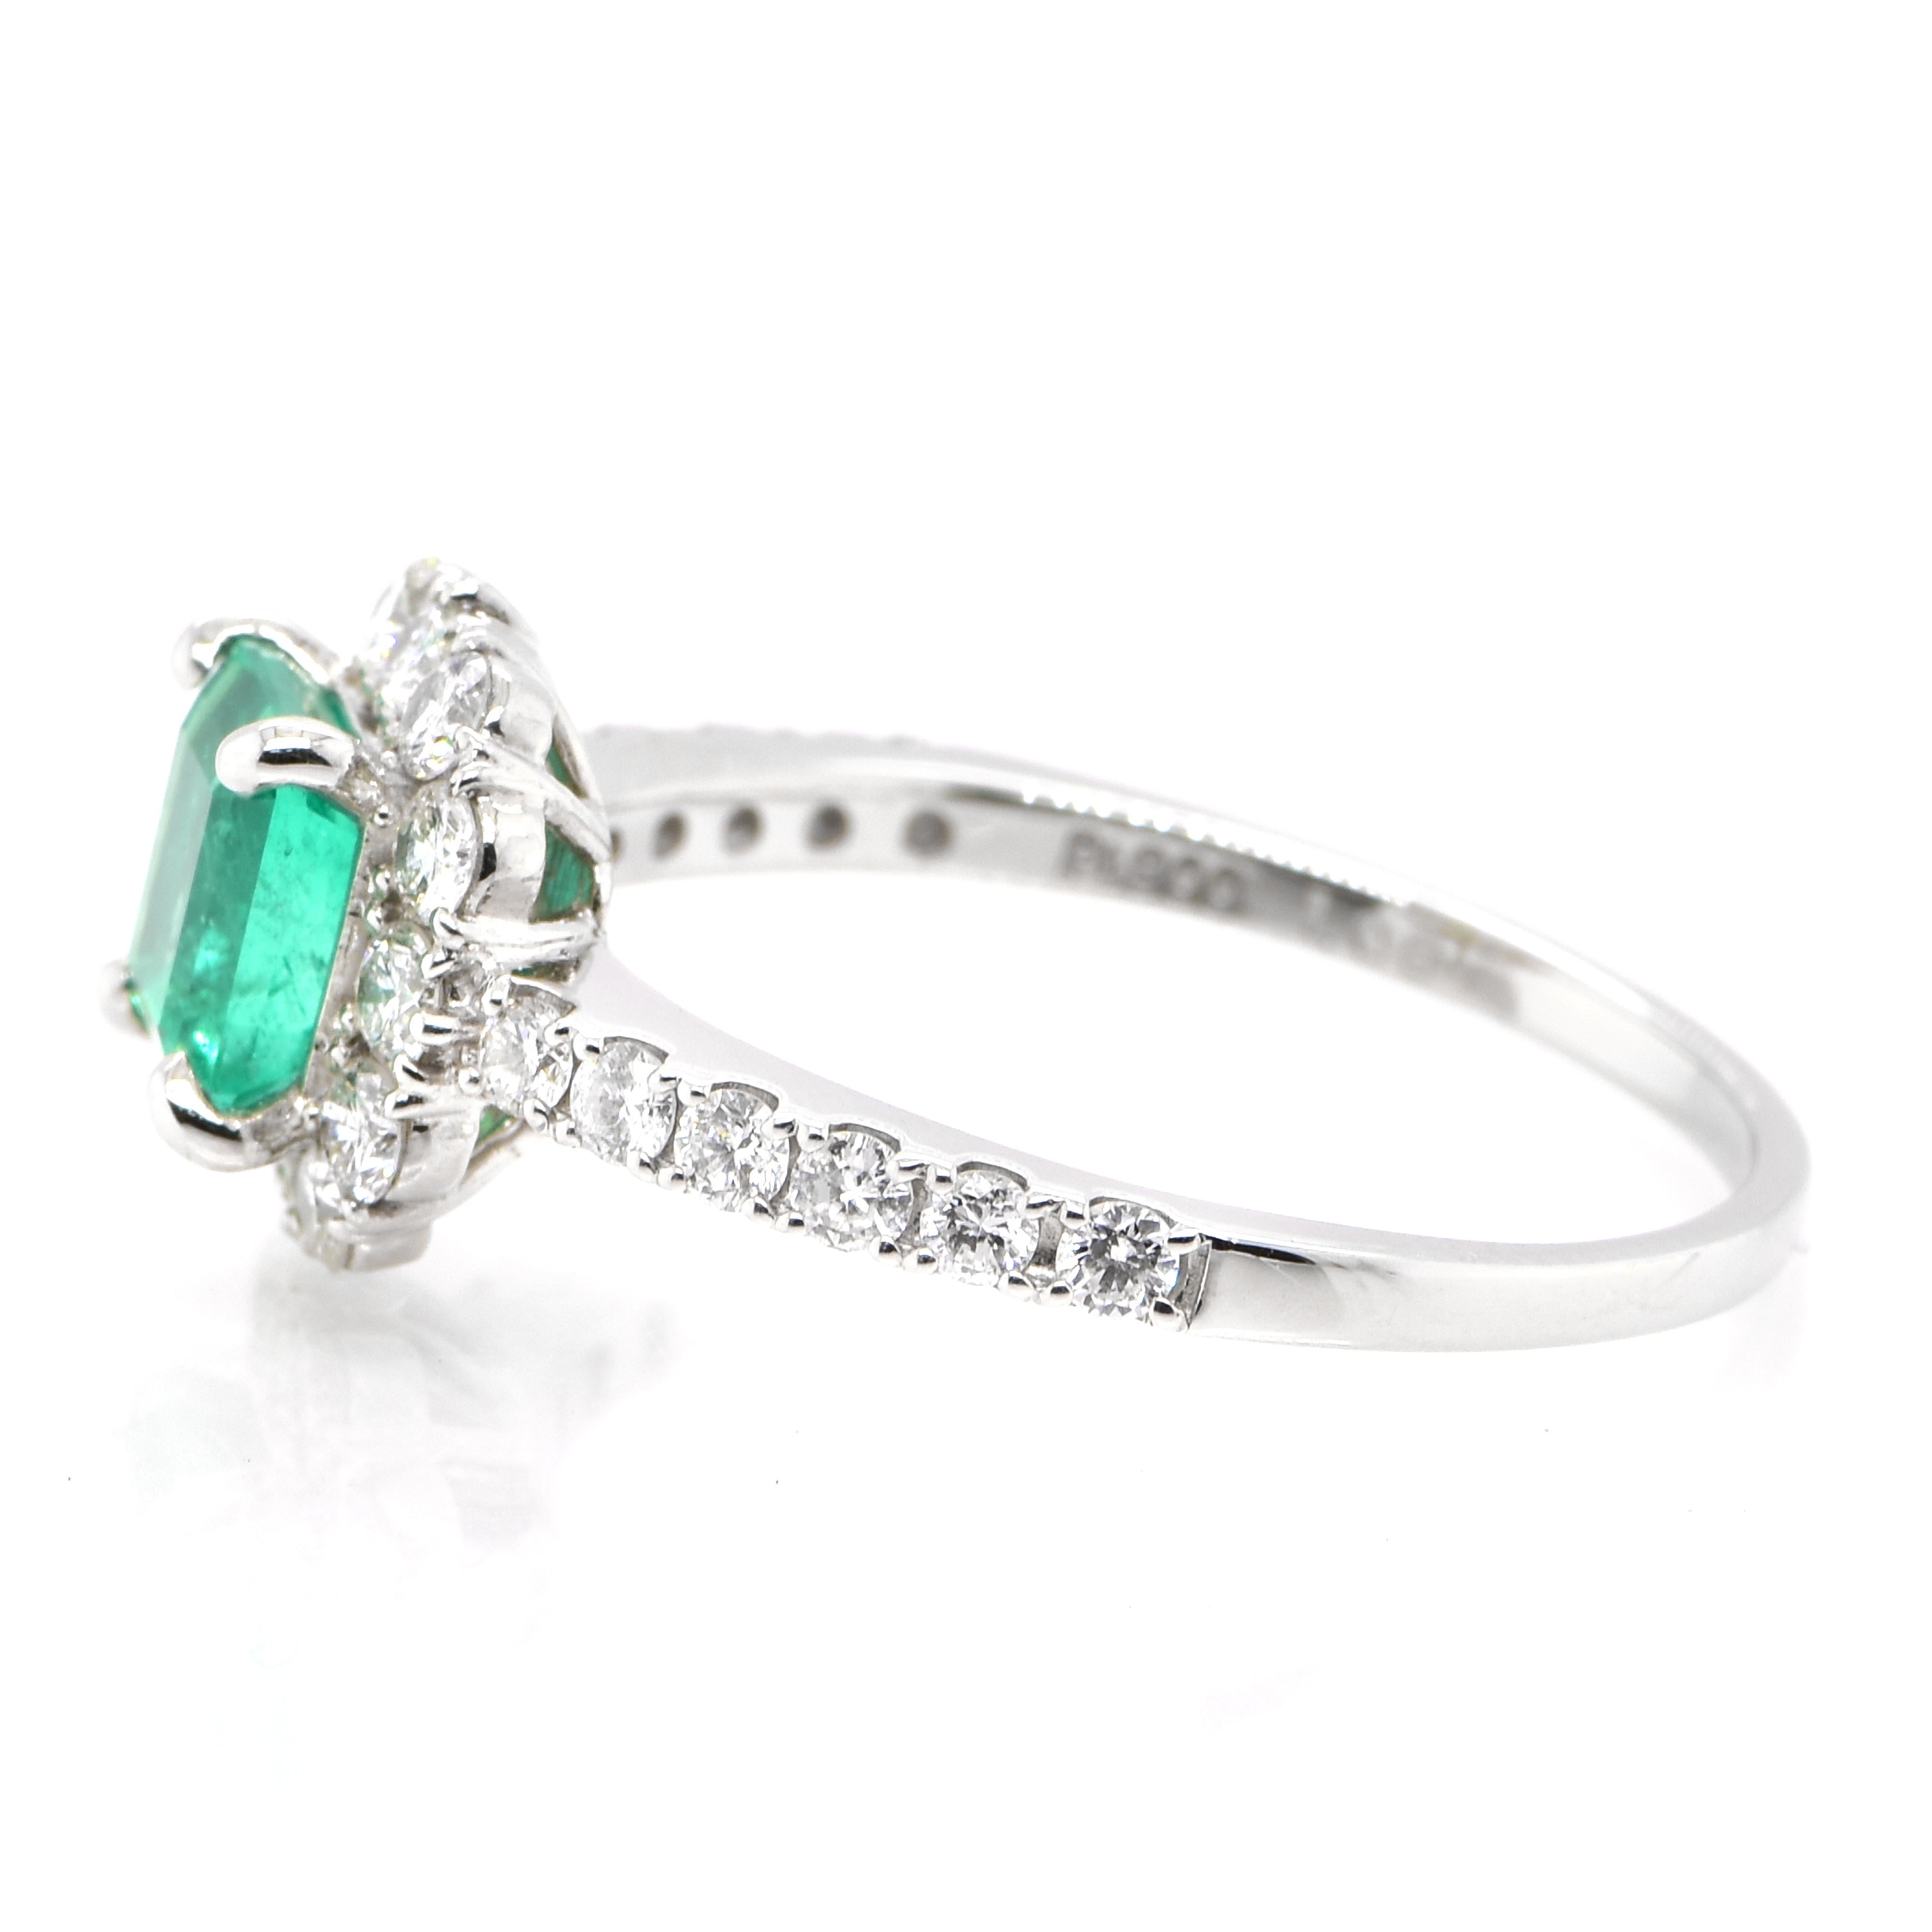 Emerald Cut 1.05 Carat Natural Colombian Emerald and Diamond Halo Ring set in Platinum For Sale